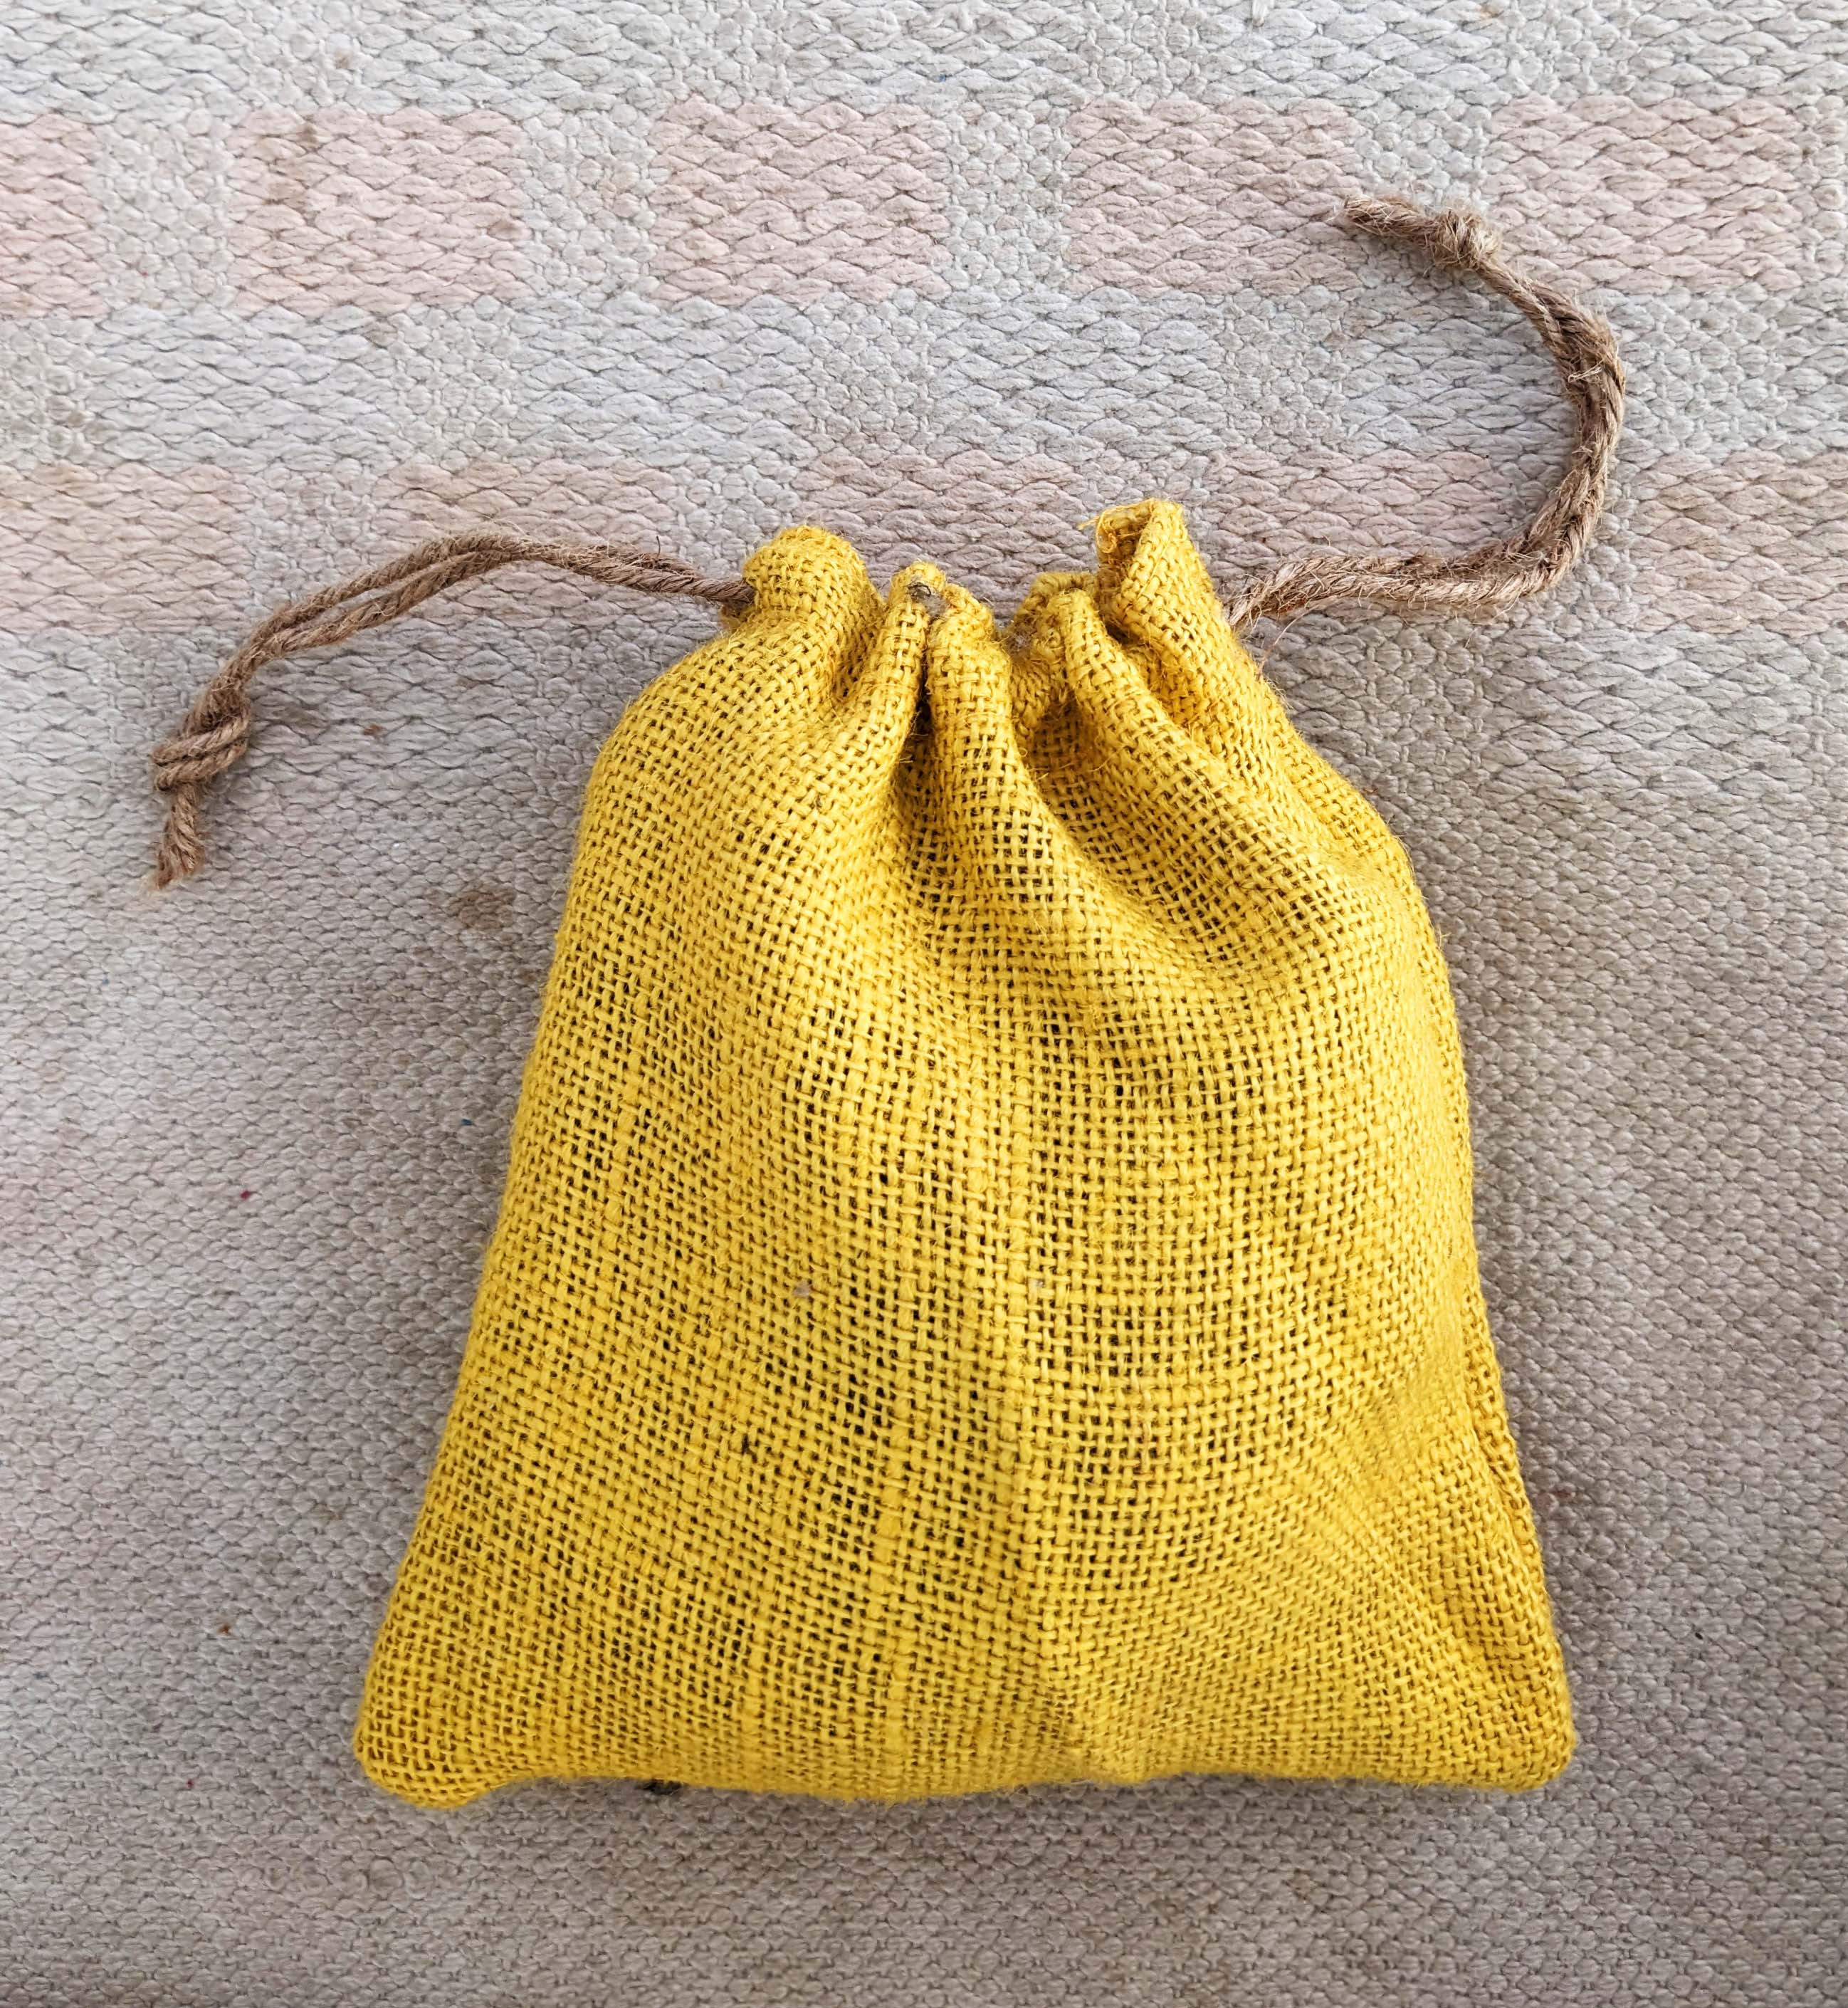 Small Silk Drawstring Gift Bags, Pack of 12 or 24. Recycled Vintage In –  Well Done Goods, by Cyberoptix